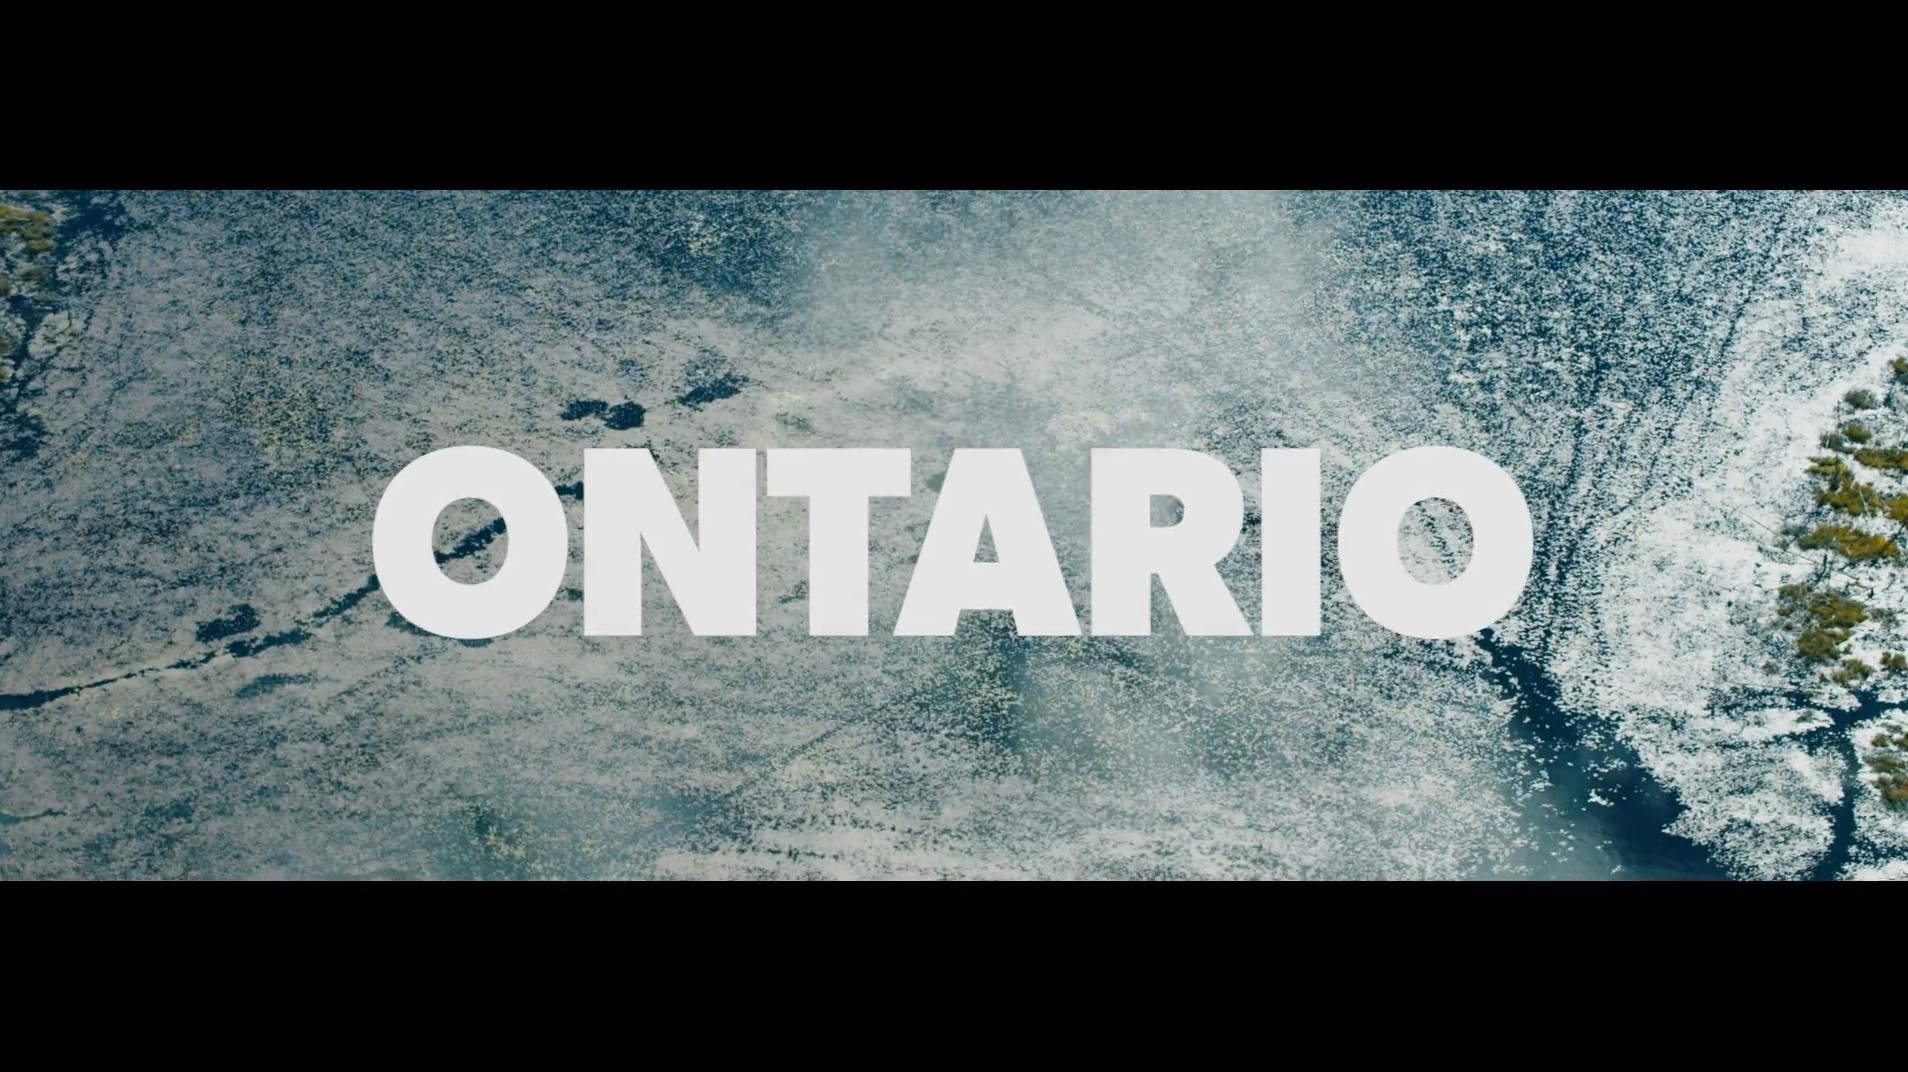 Video: Ontario is your tourism investment destination